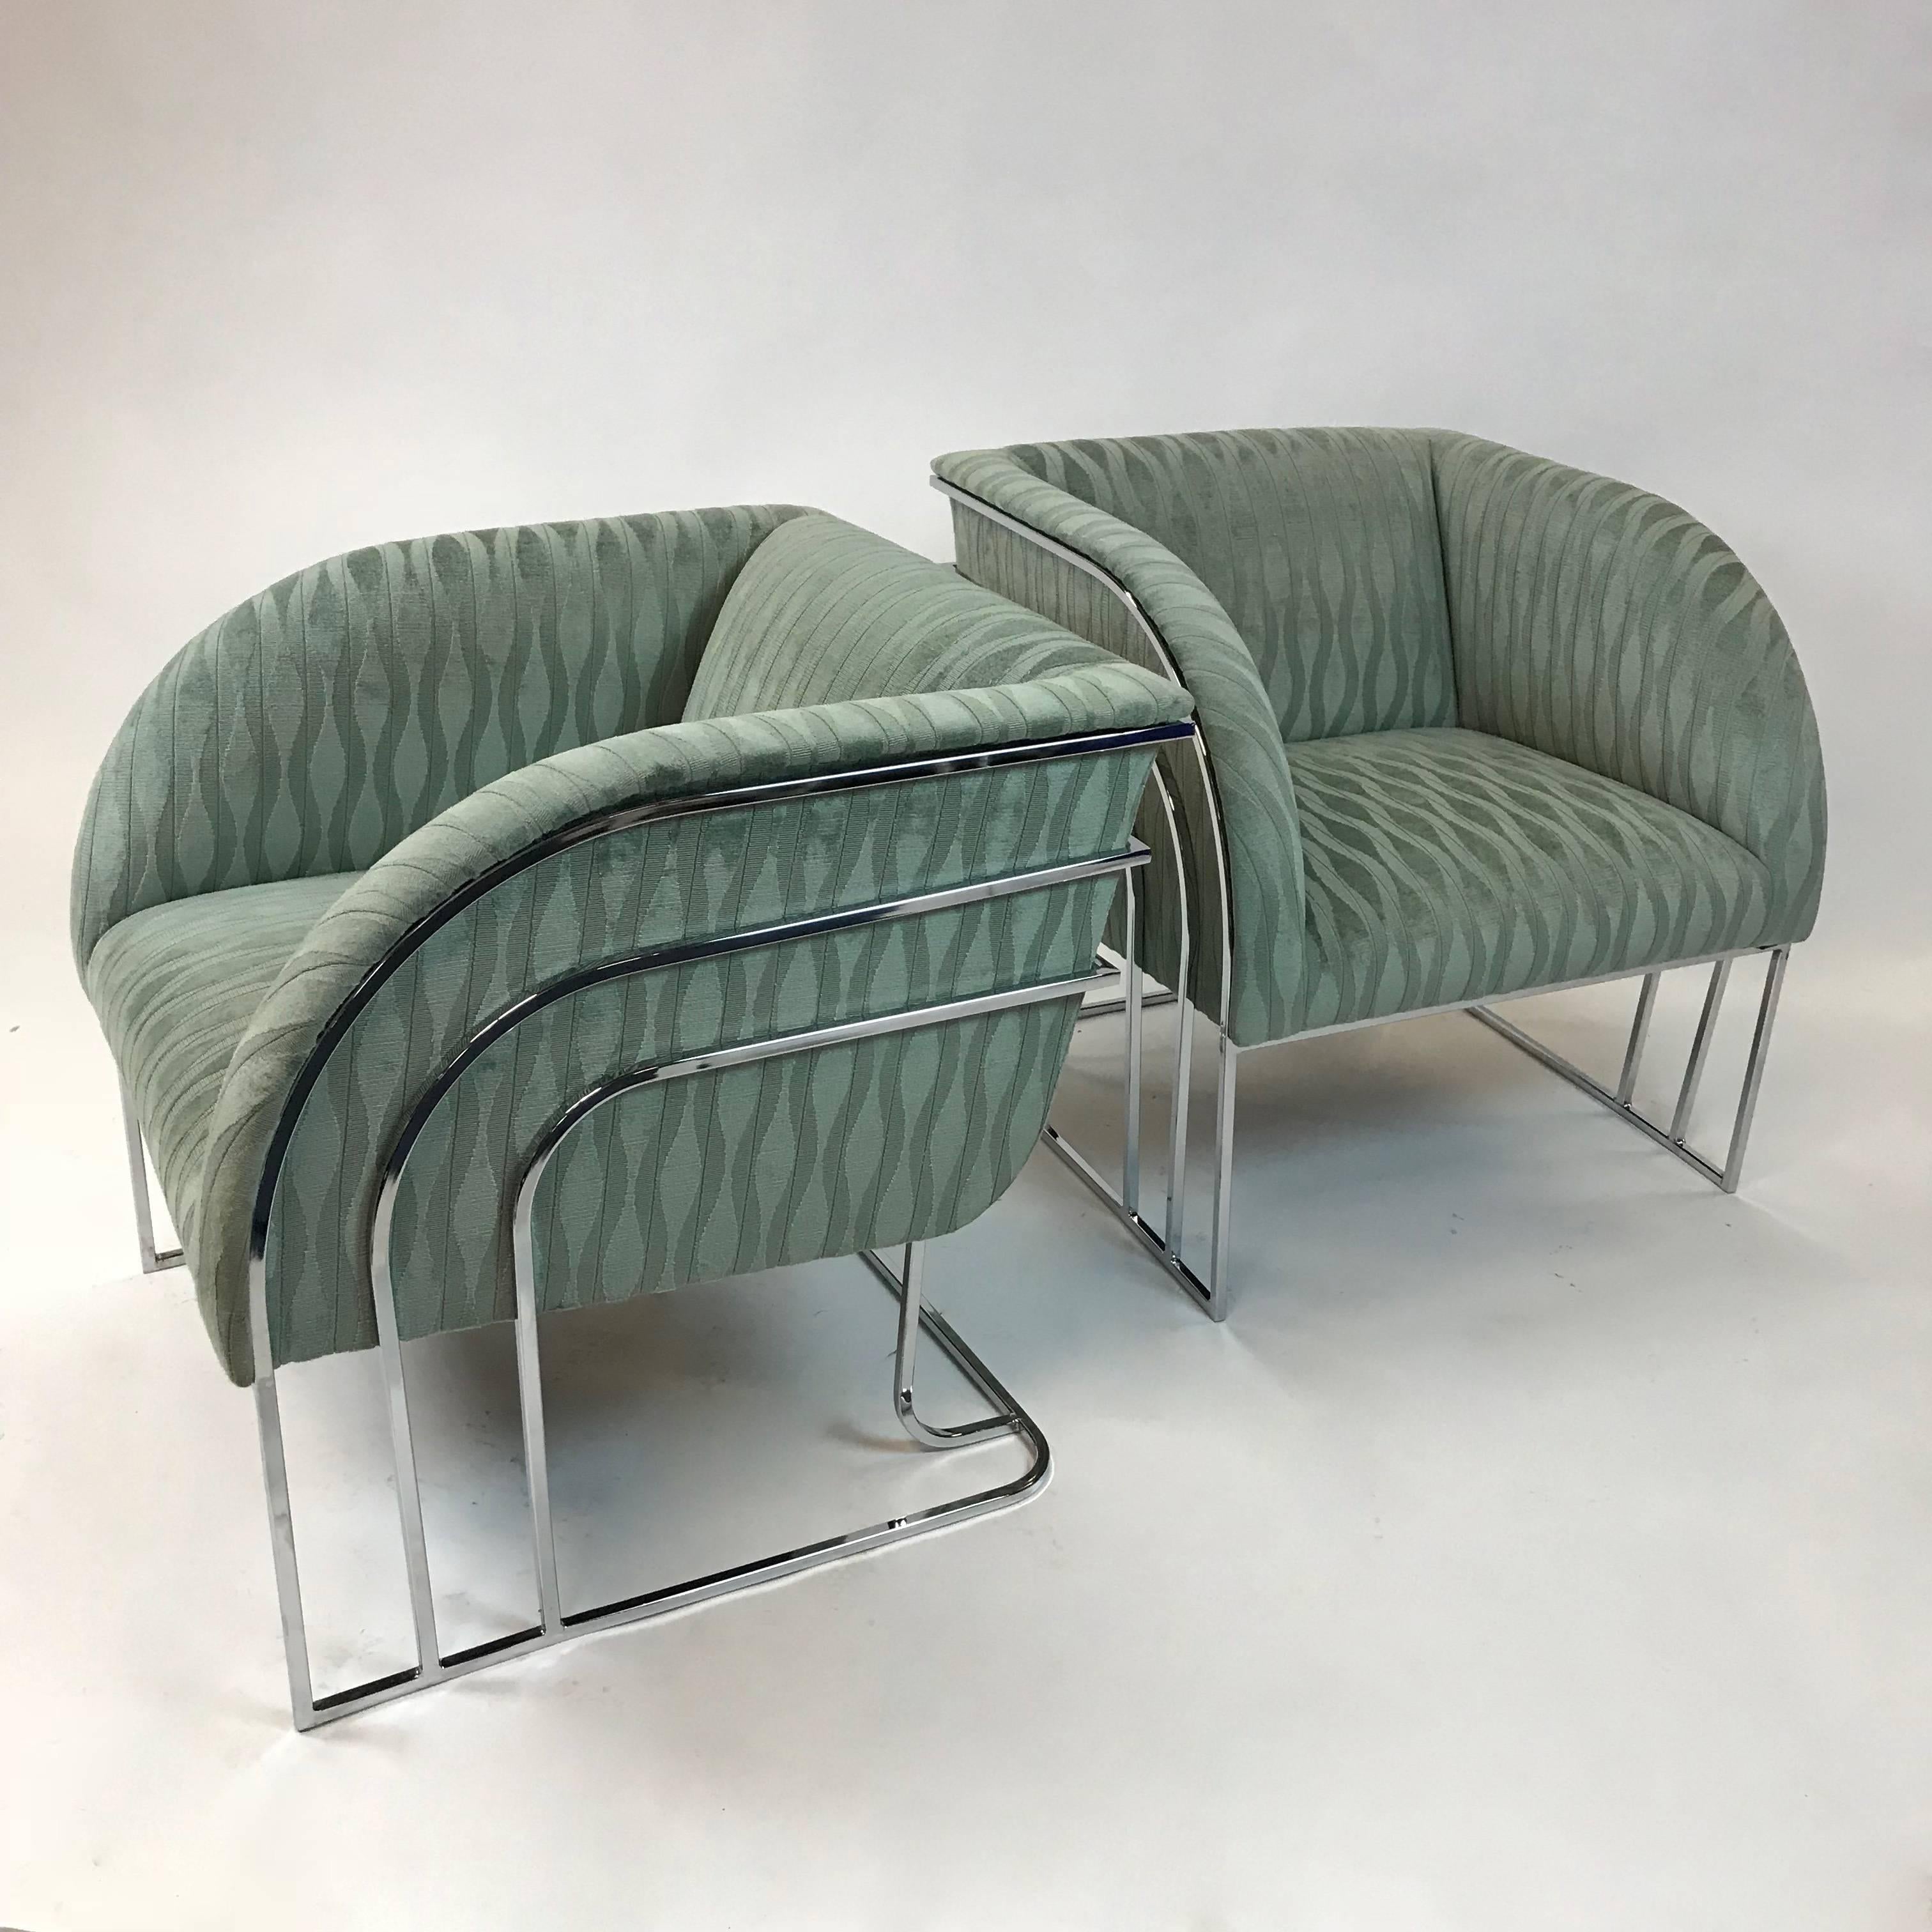 Stunning pair of club, lounge chairs by George Mergenov for Weiman/Warren Lloyd featuring rainbow, chrome frames are newly upholstered in moss green jacquard. These chairs are very much in the style of Milo Baughman and are sometimes attributed to